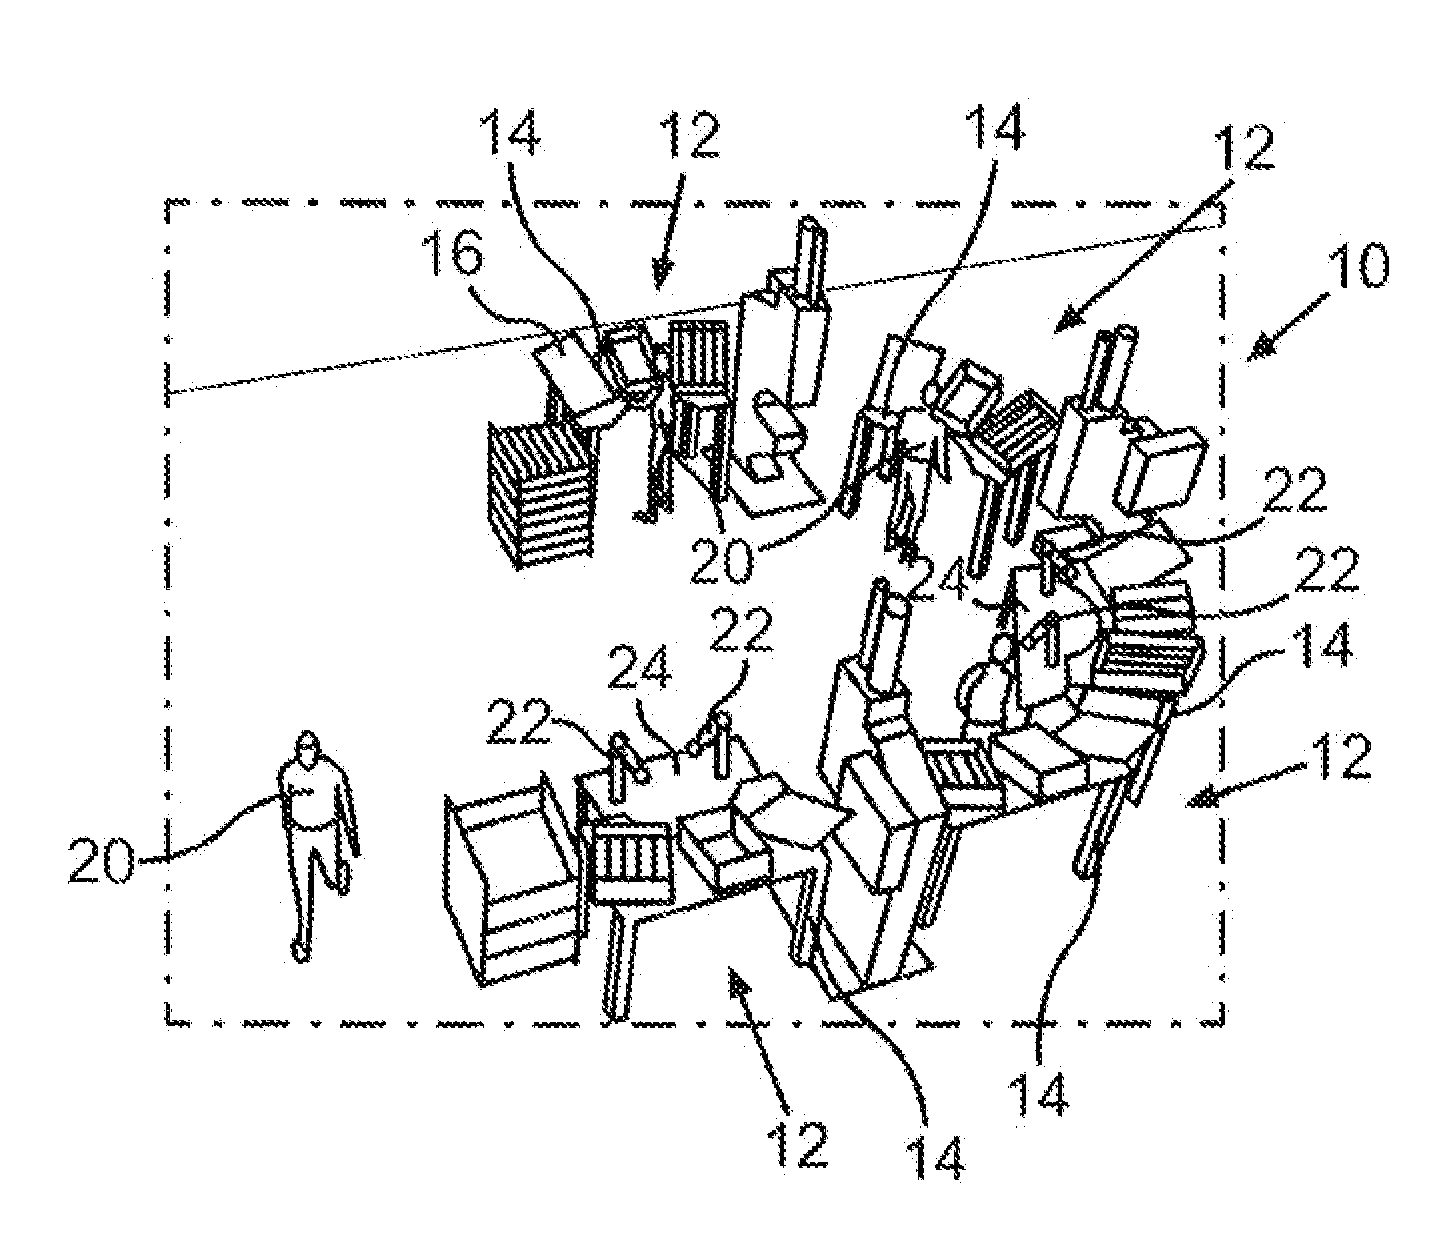 Method for Operating a Production Plant